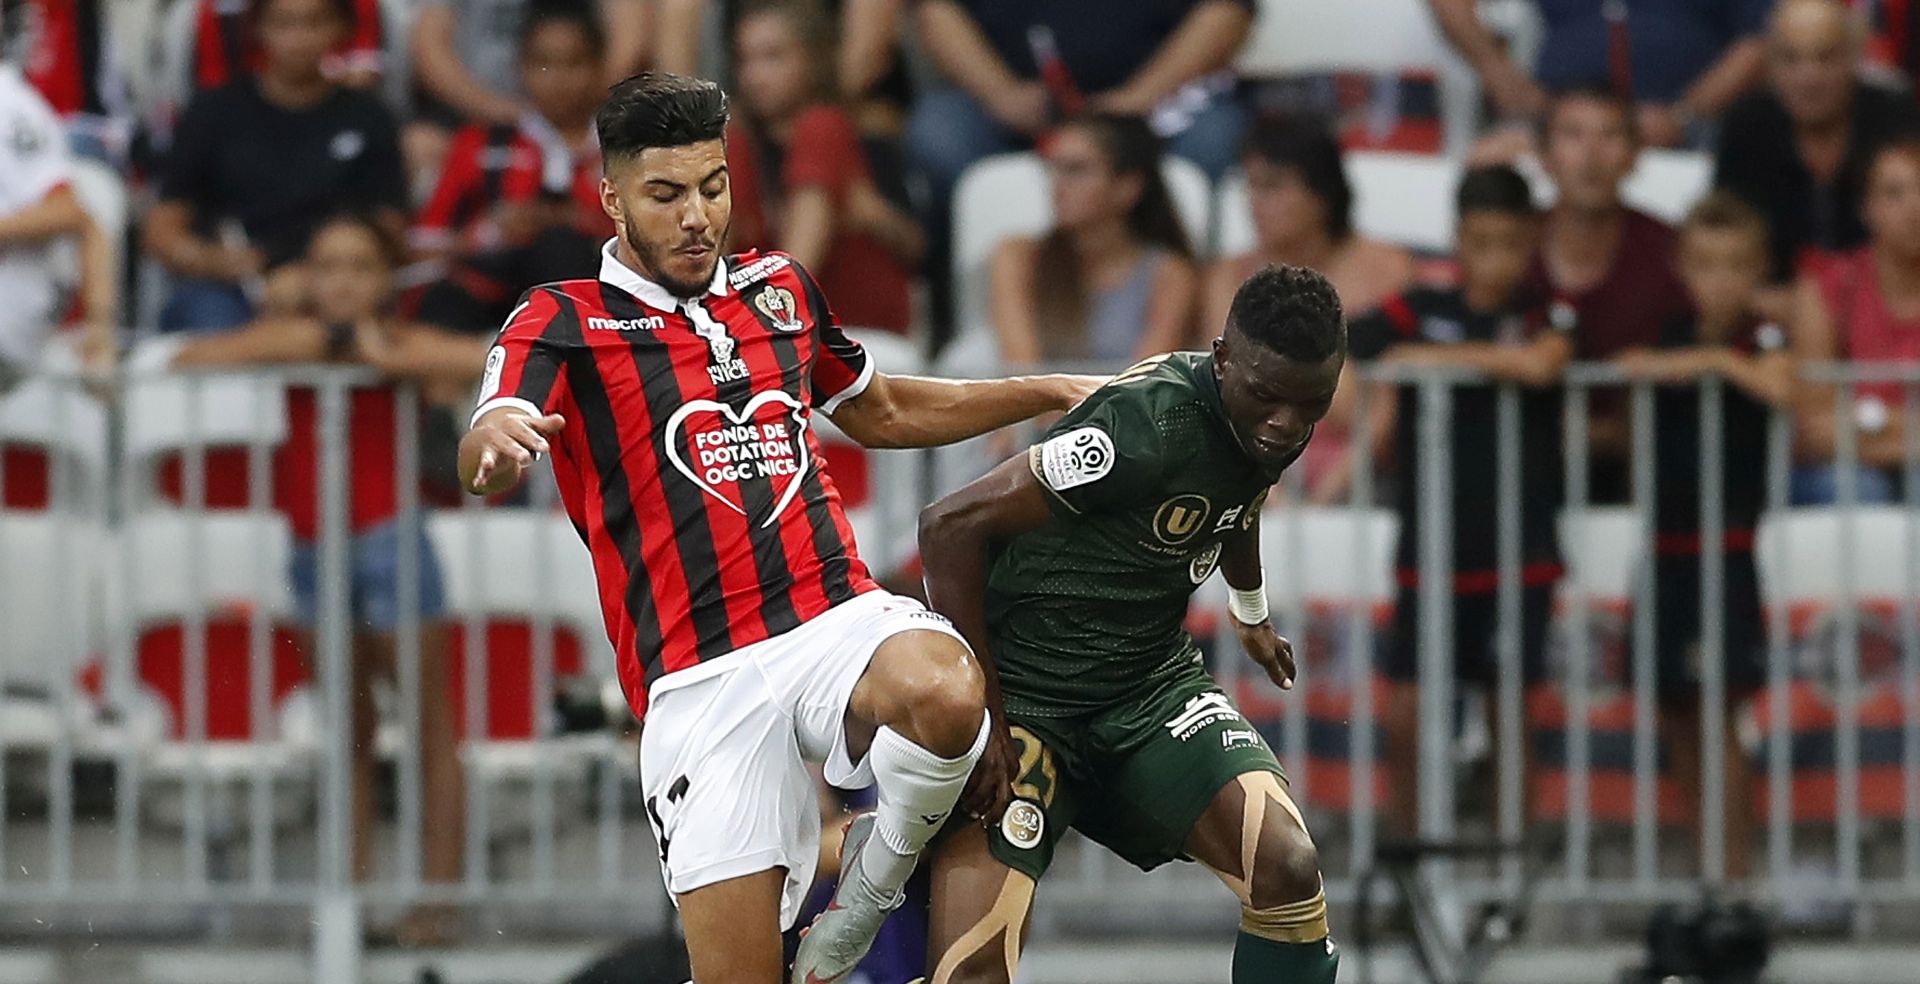 epa06944060 Bassem Srarfi of OGC Nice (L) vies for the ball with Moussa Doumbia of Reims (R) during the French Ligue 1 soccer match between OGC Nice and Reims at the Allianz Riviera stadium, in Nice, France, 11 August 2018.  EPA/SEBASTIEN NOGIER